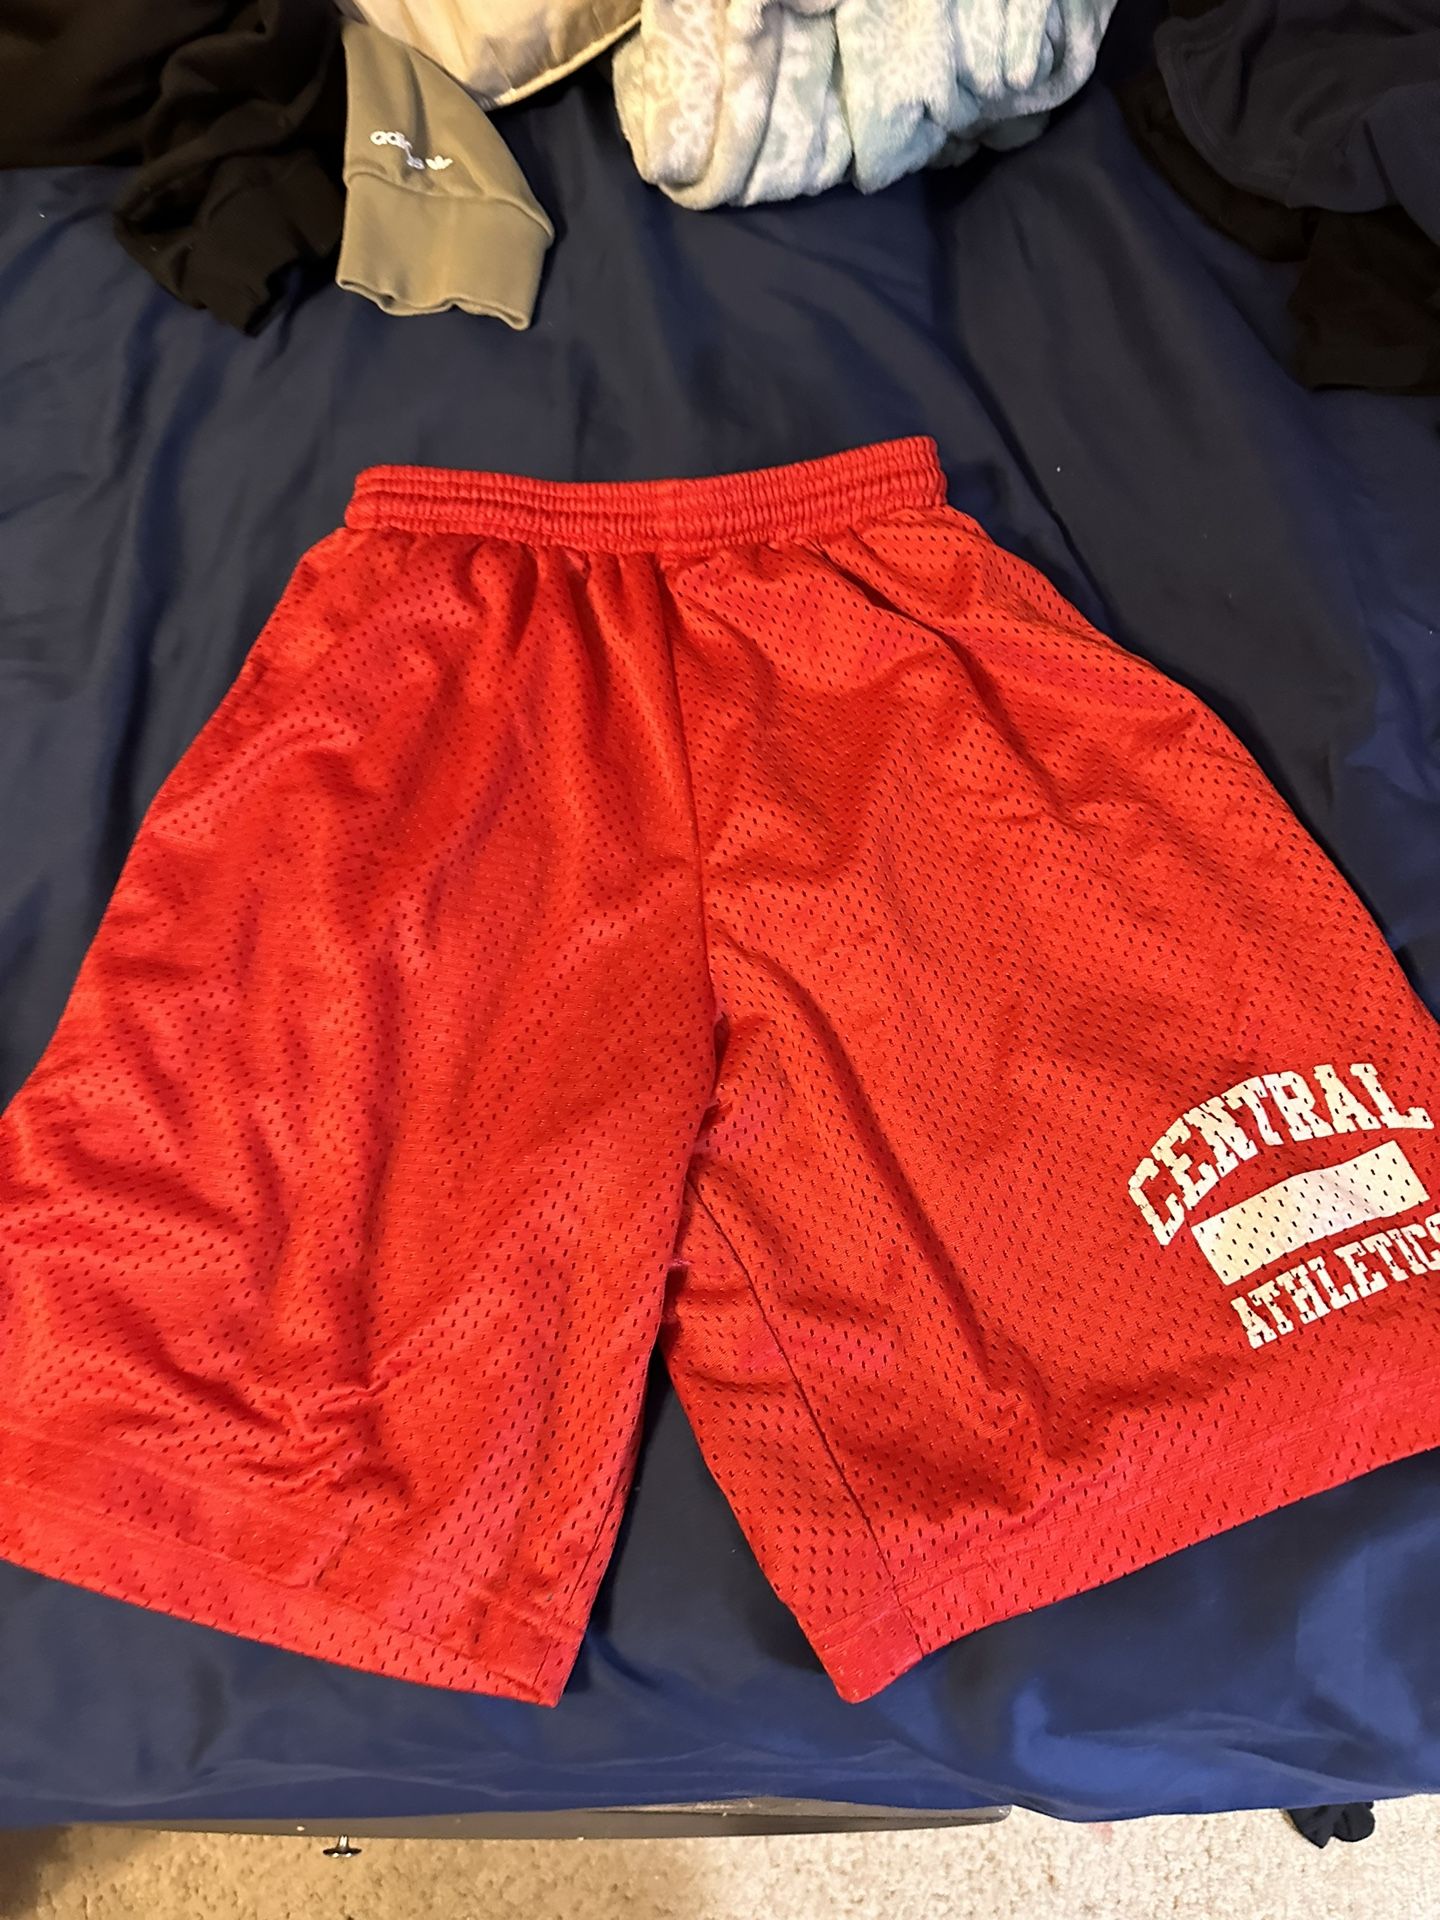 Red Gym shorts